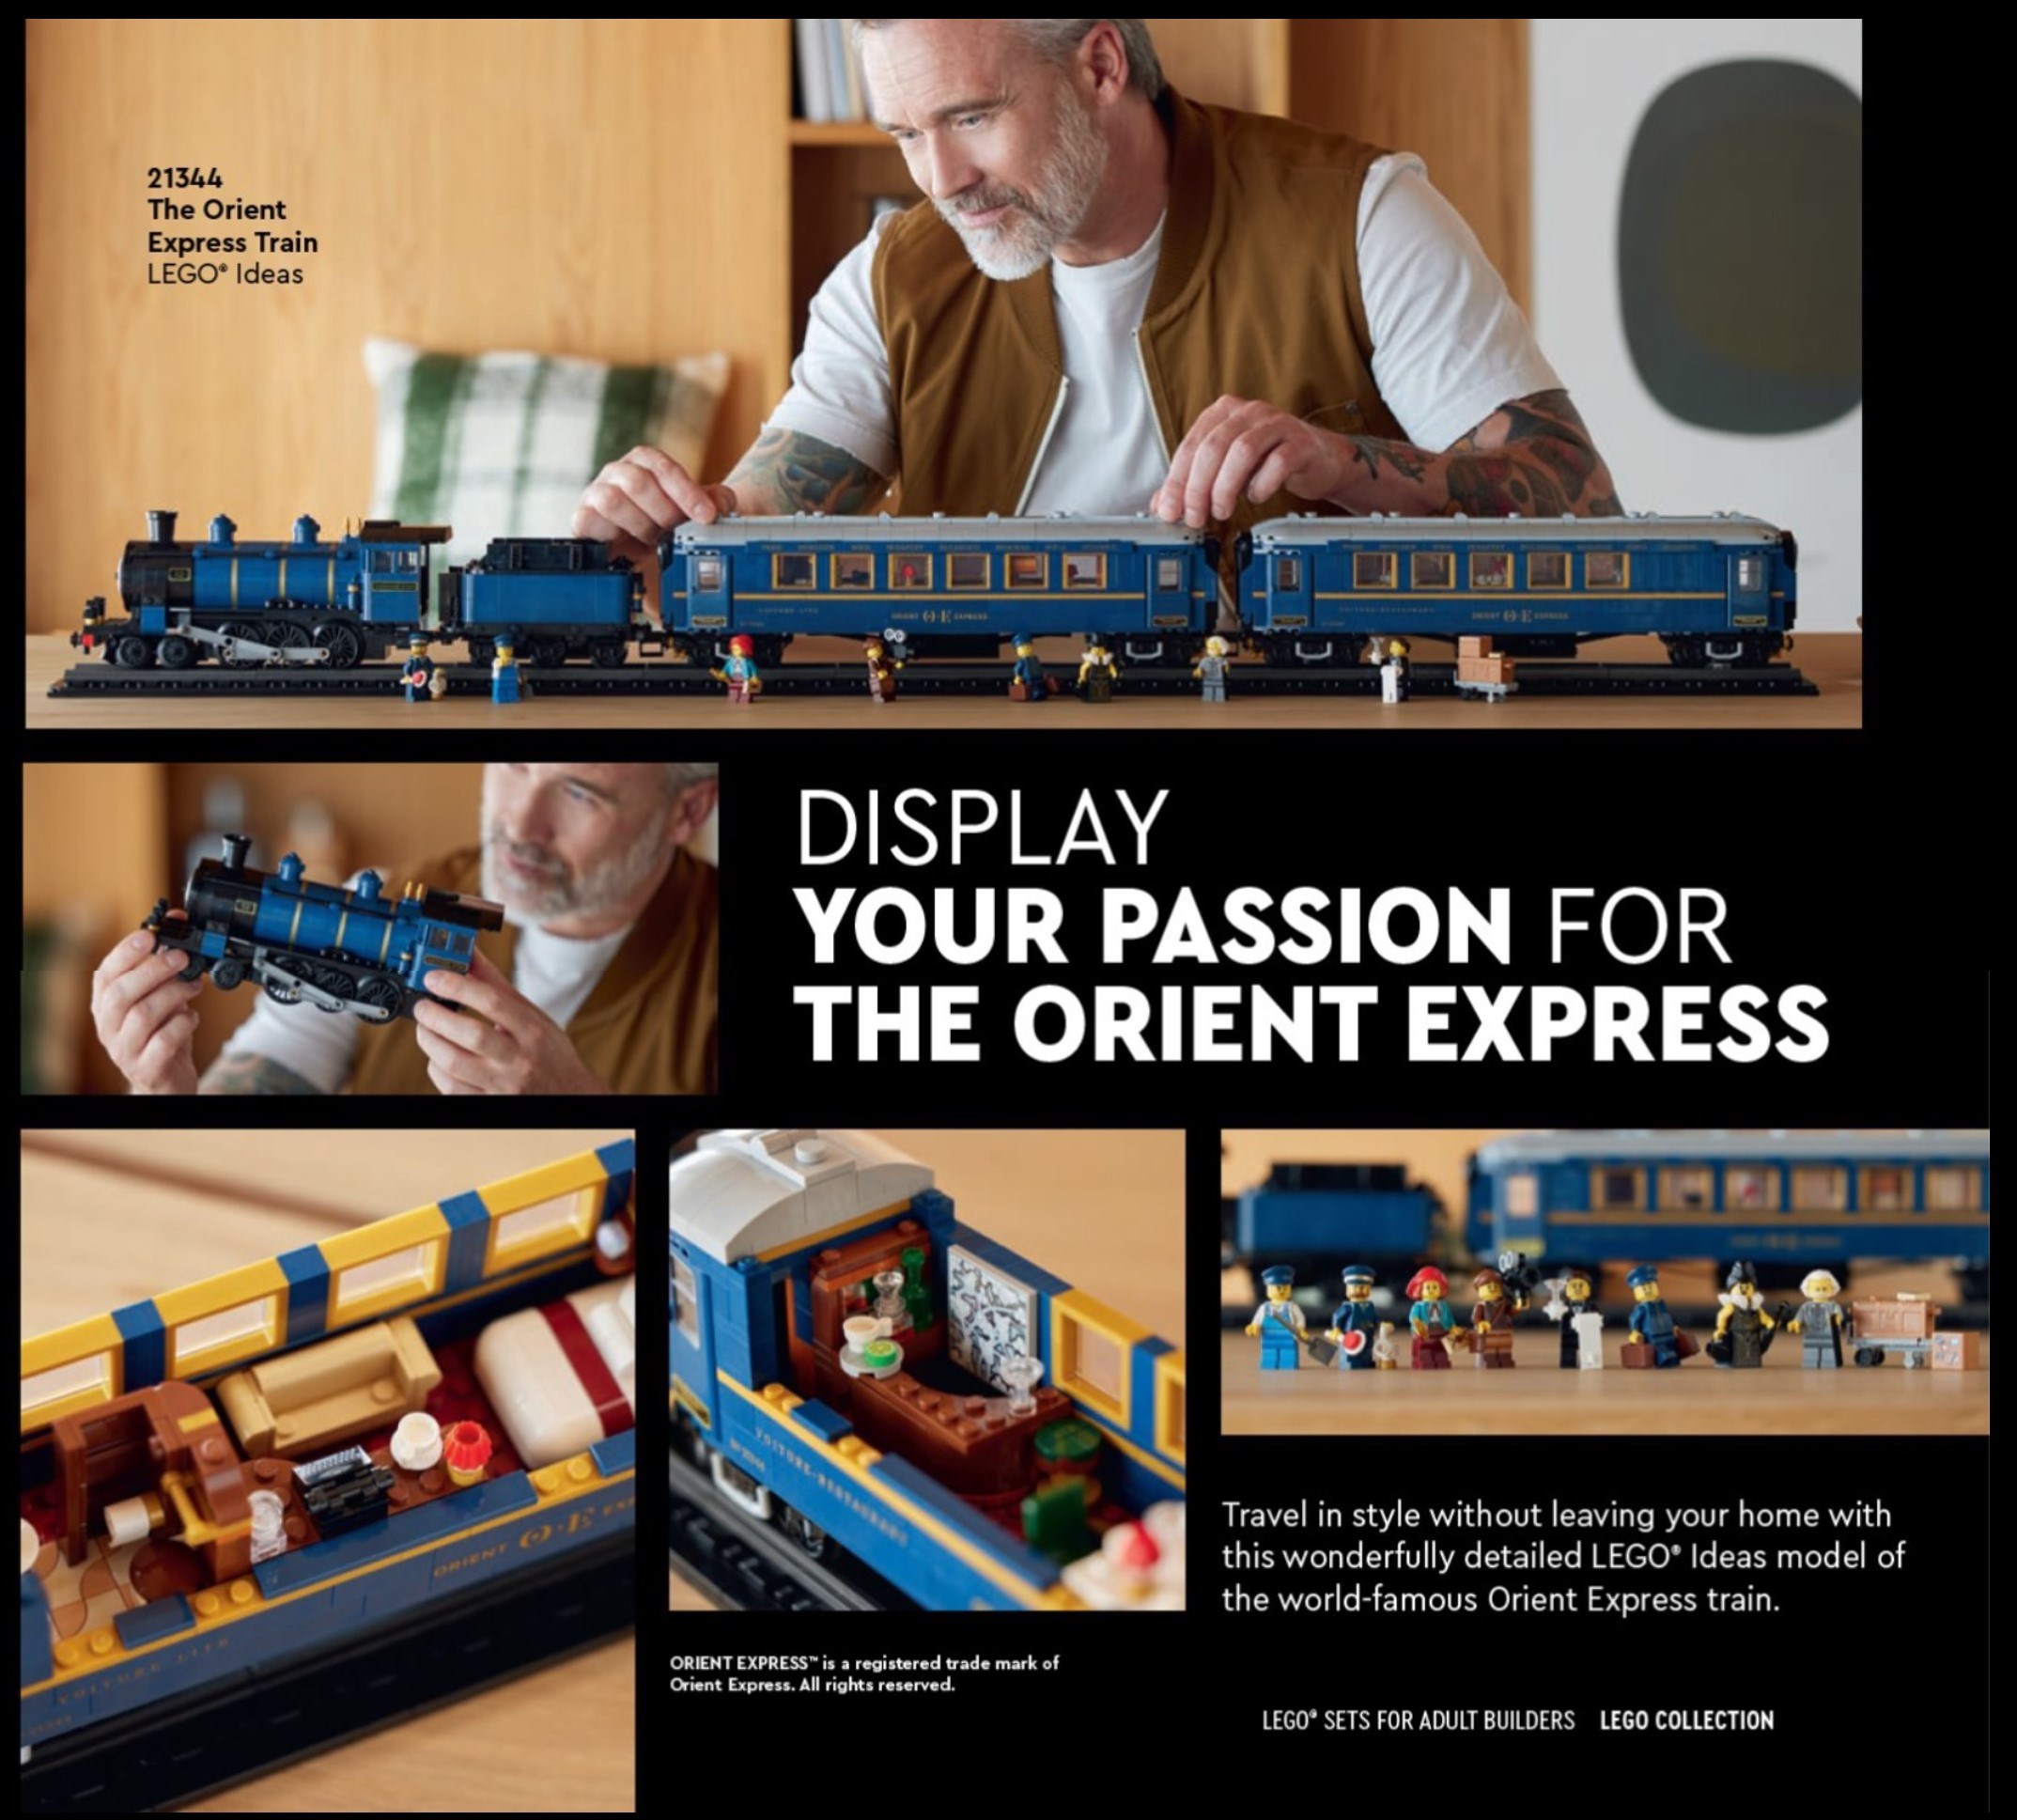 The Famed Orient Express Is Returning to Italy in 2023